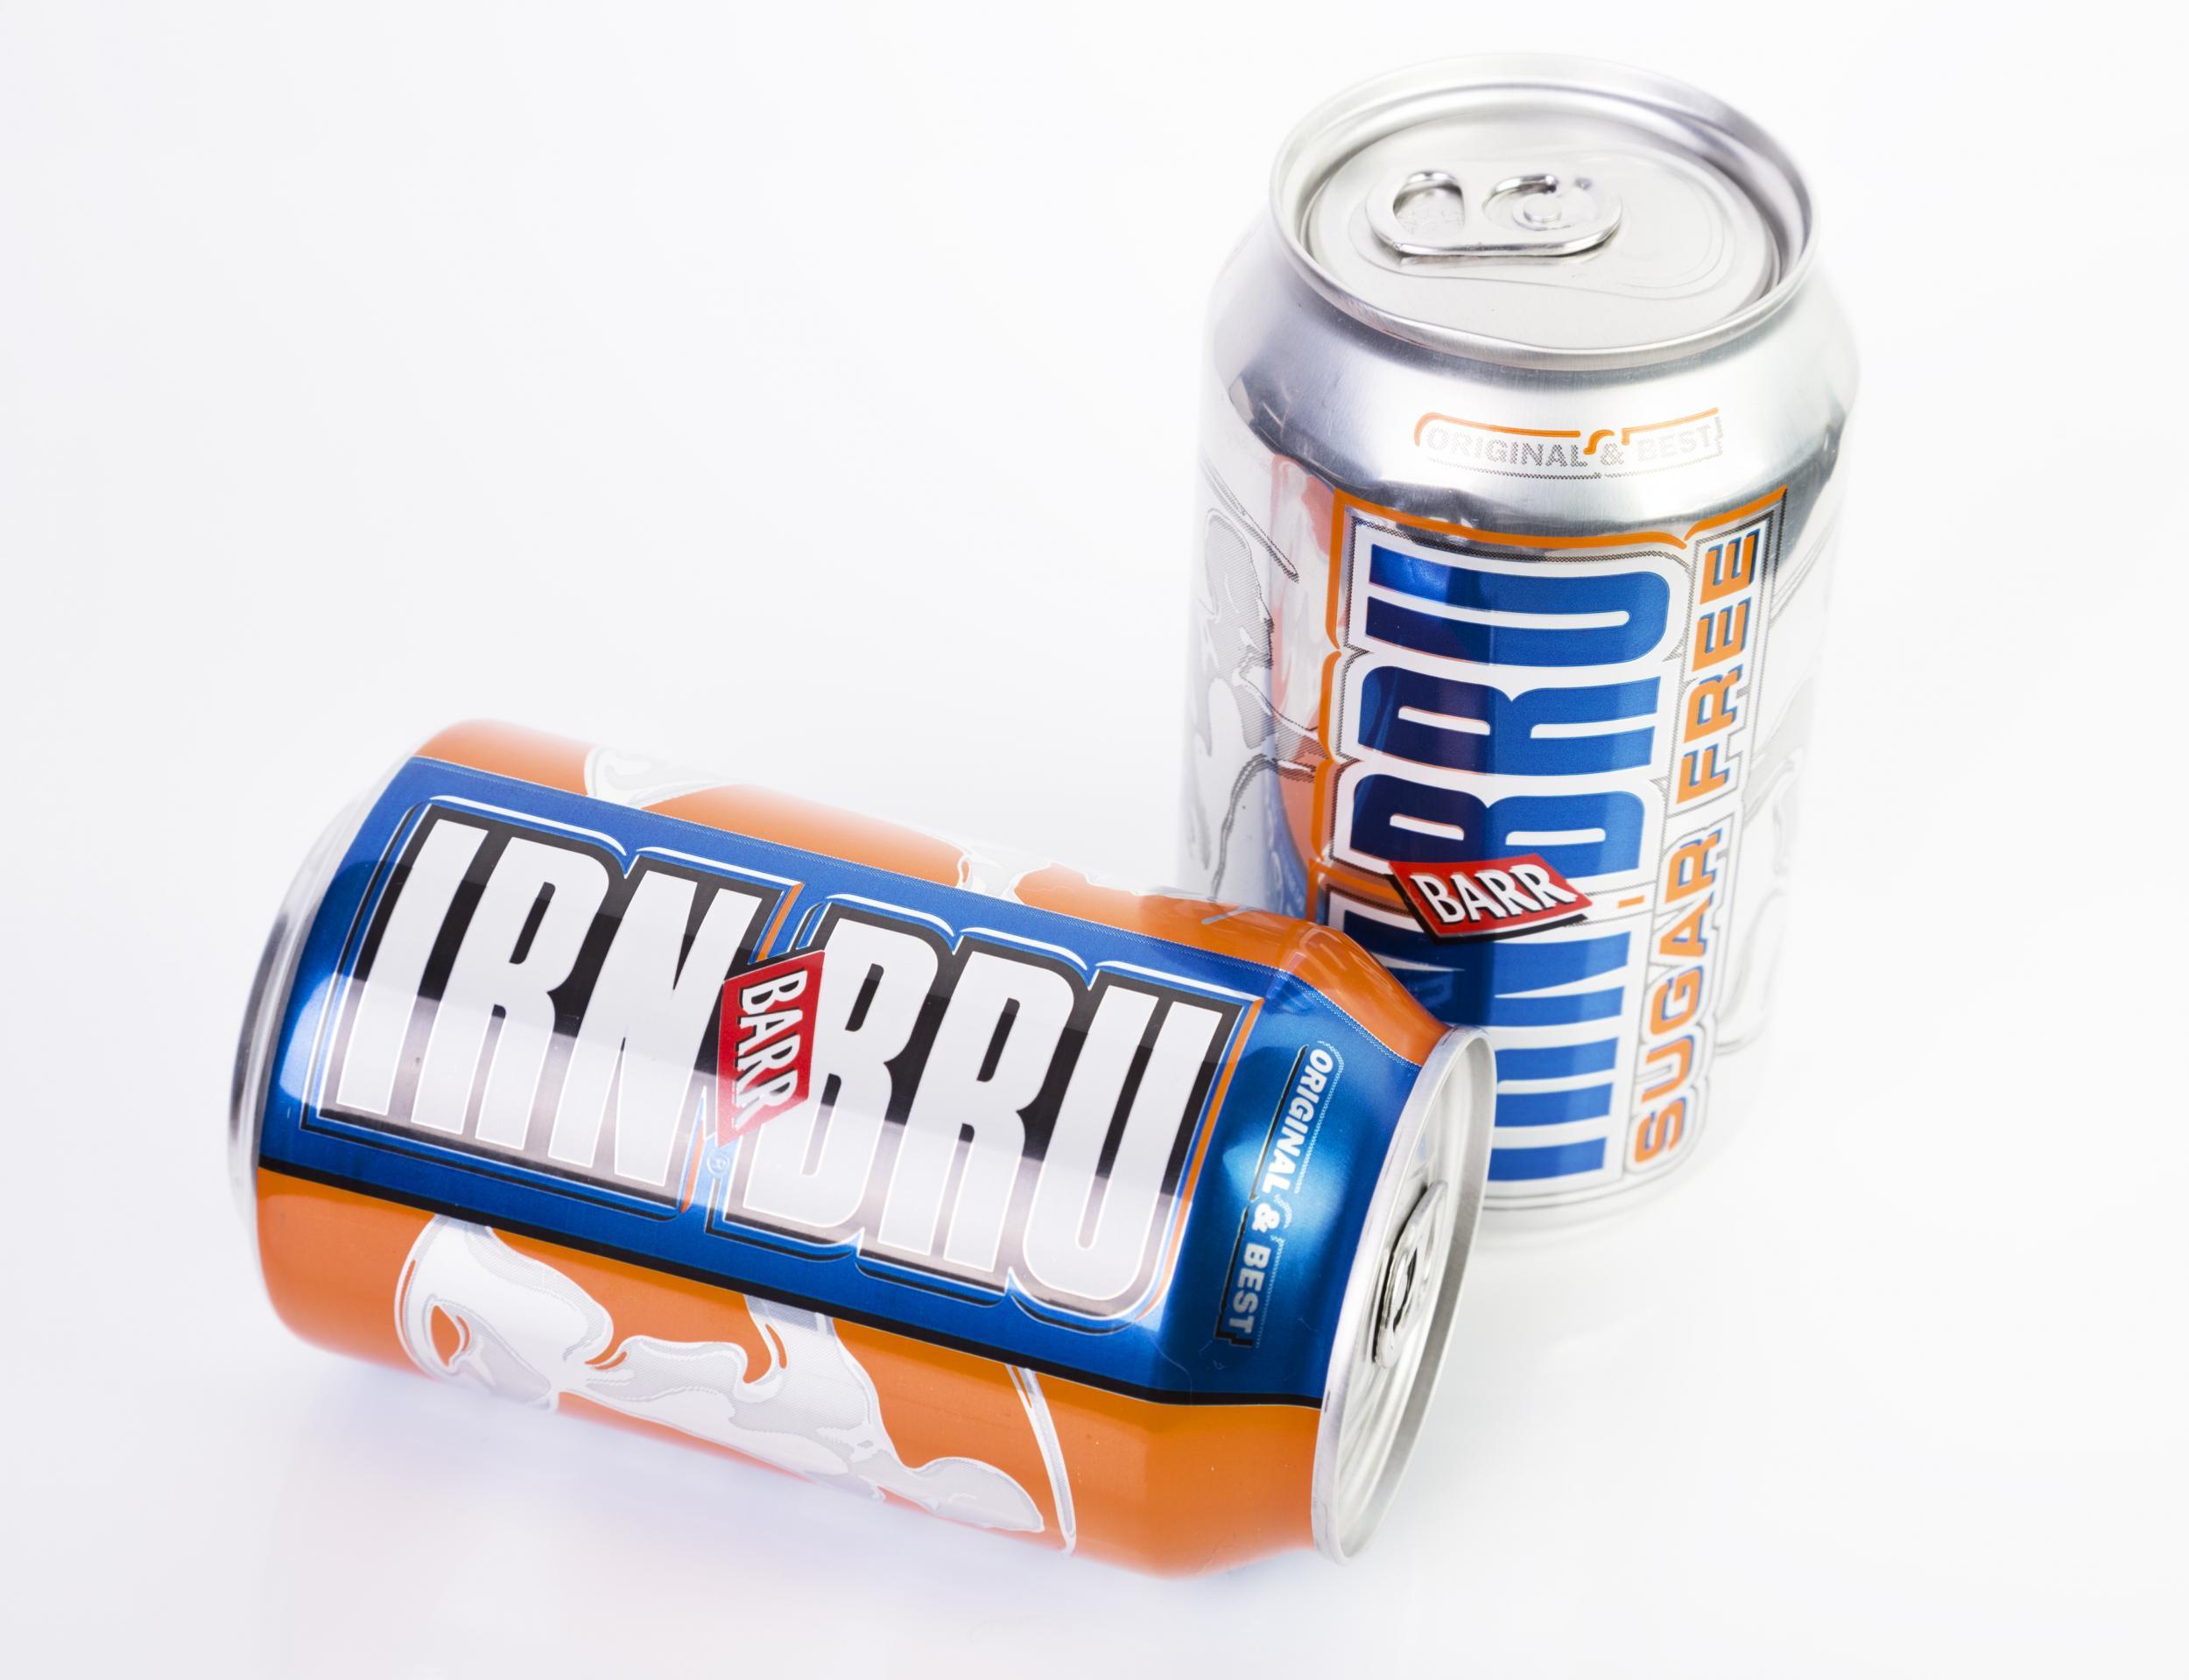 &#13;
Scots say goodbye to their beloved soft drink&#13;